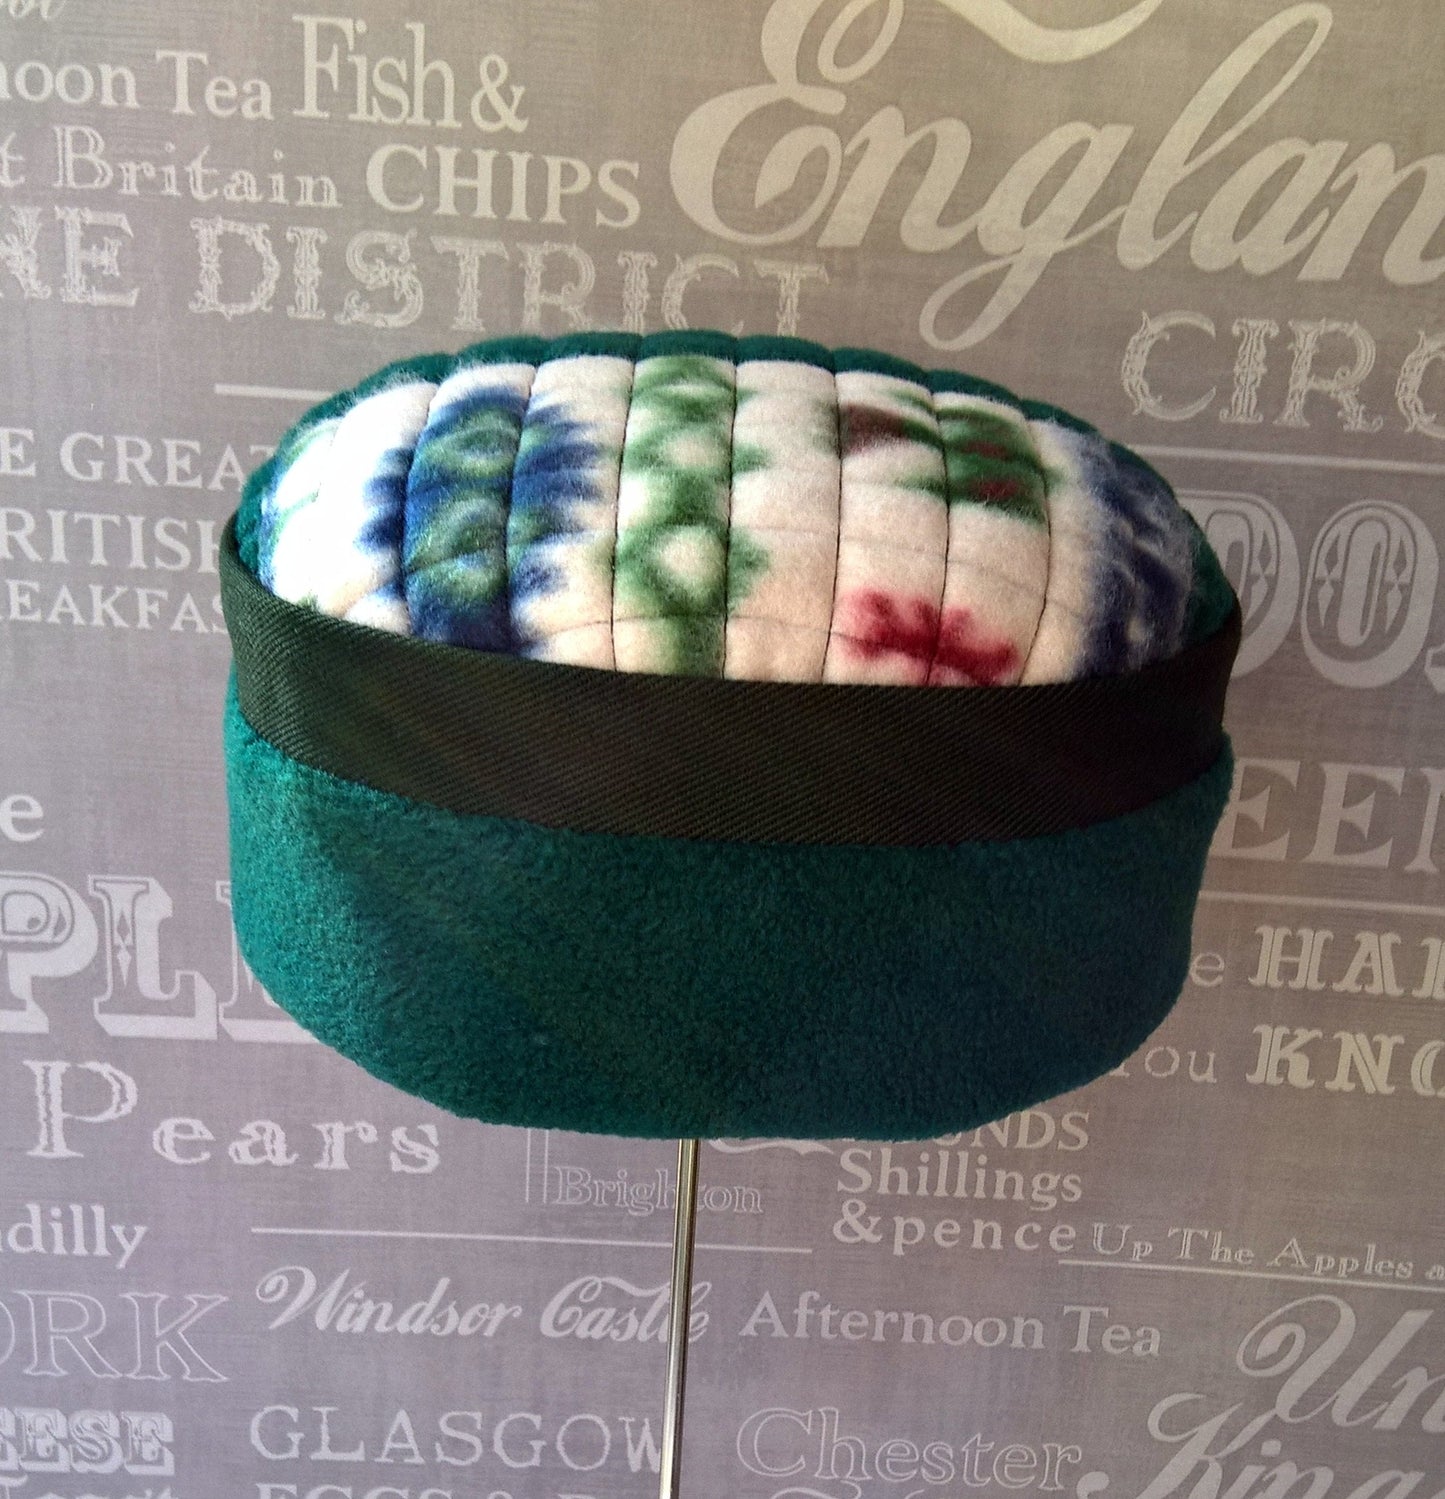 Forest green fleece hat with Aztec patterned tip